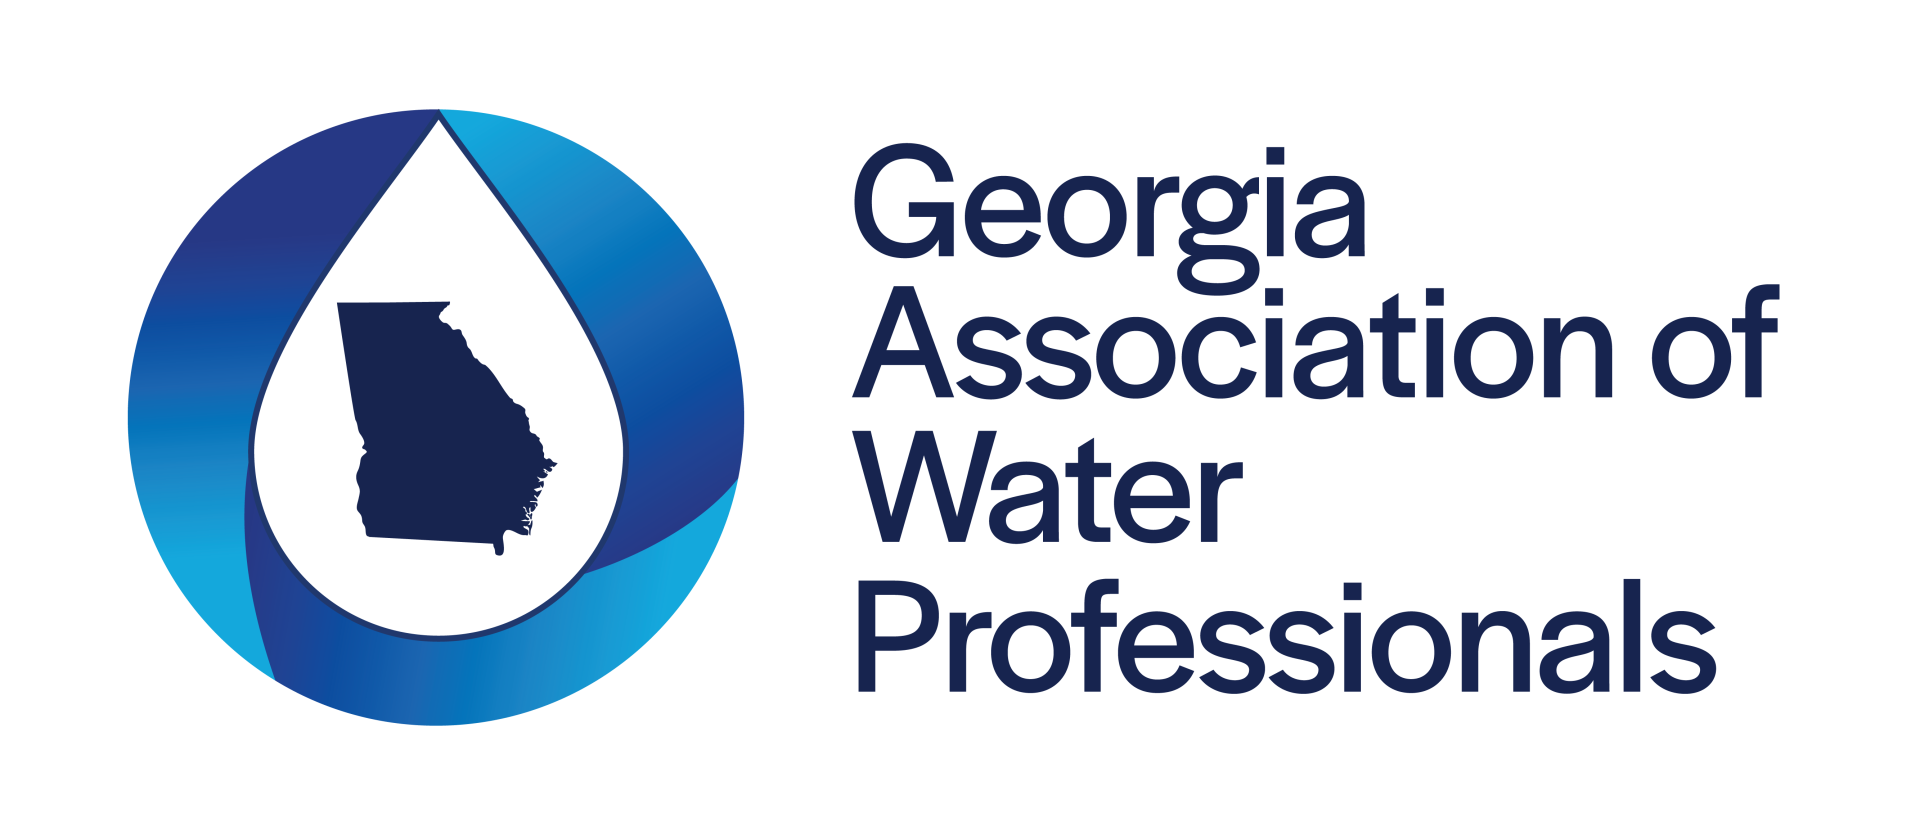 Georgia Association of Water Professionals Annual conference and expo